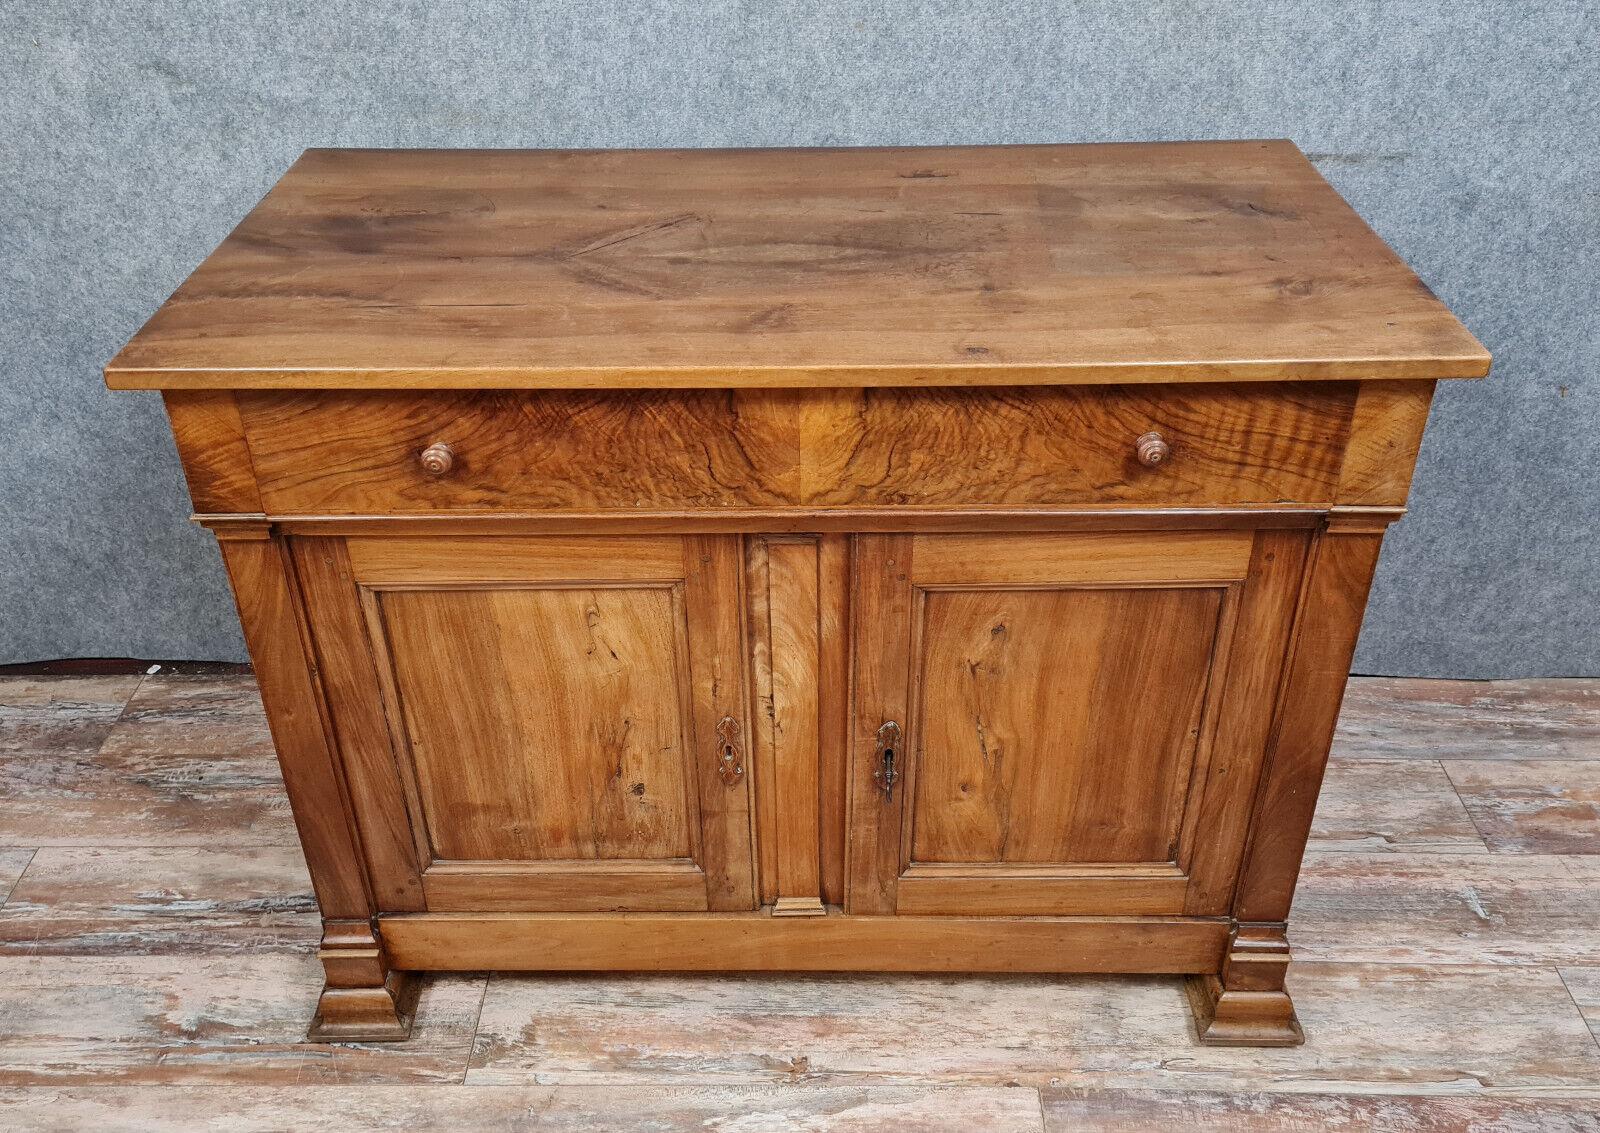 Transport yourself to the early 19th century with this magnificent Empire period walnut buffet, crafted around 1810-1820. A stunning example of the Empire style, this buffet exudes timeless sophistication and refined elegance.

Key